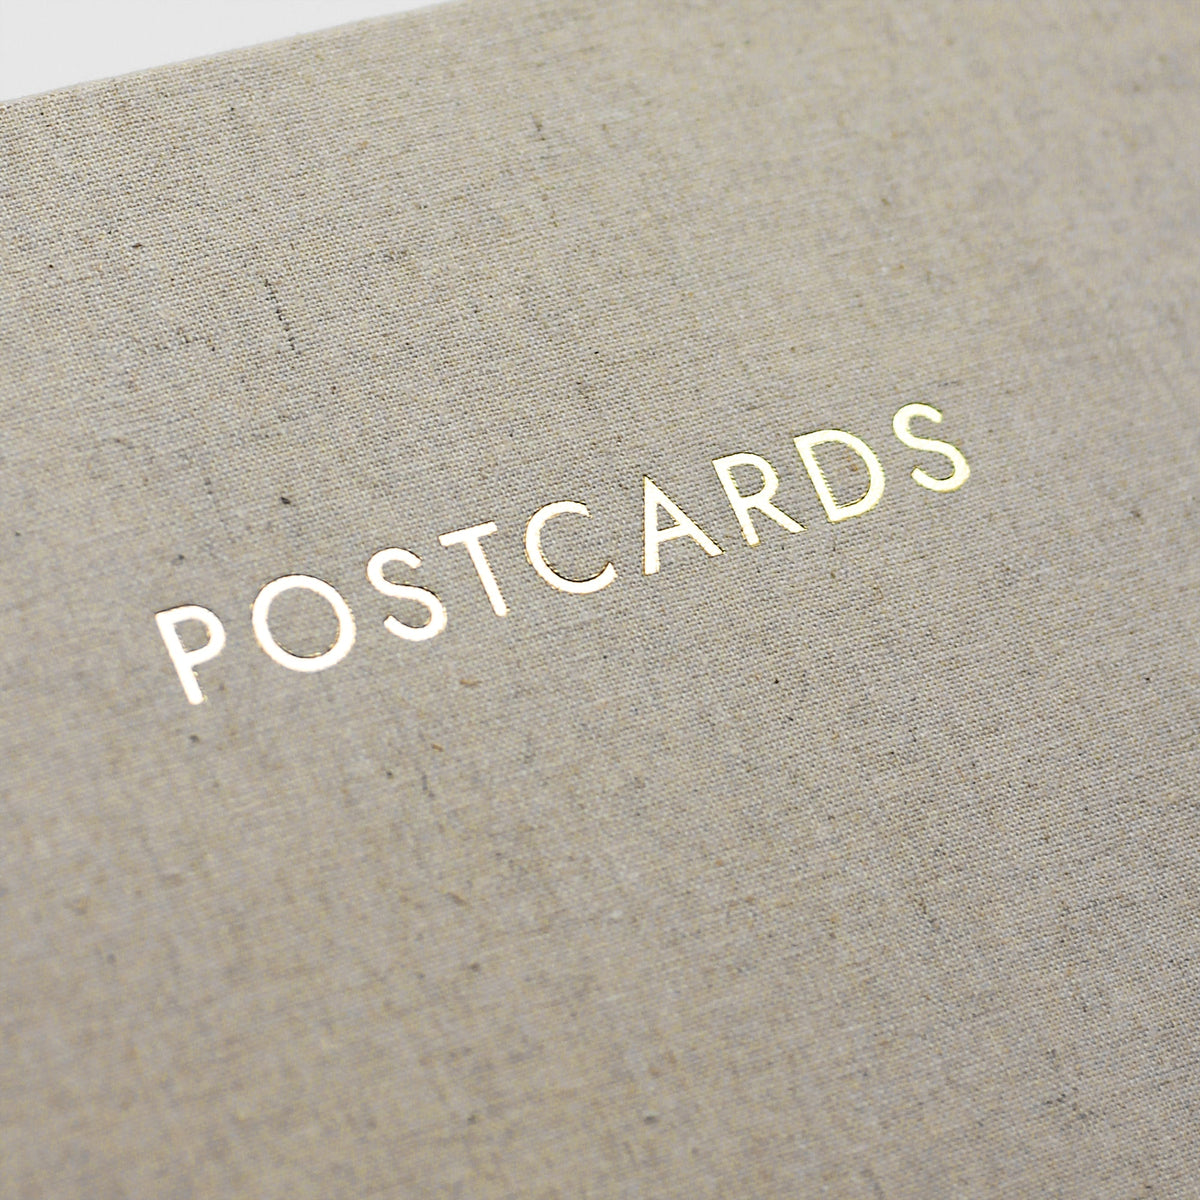 Medium Postcard Album with Natural Linen Cover for 4x6 postcards